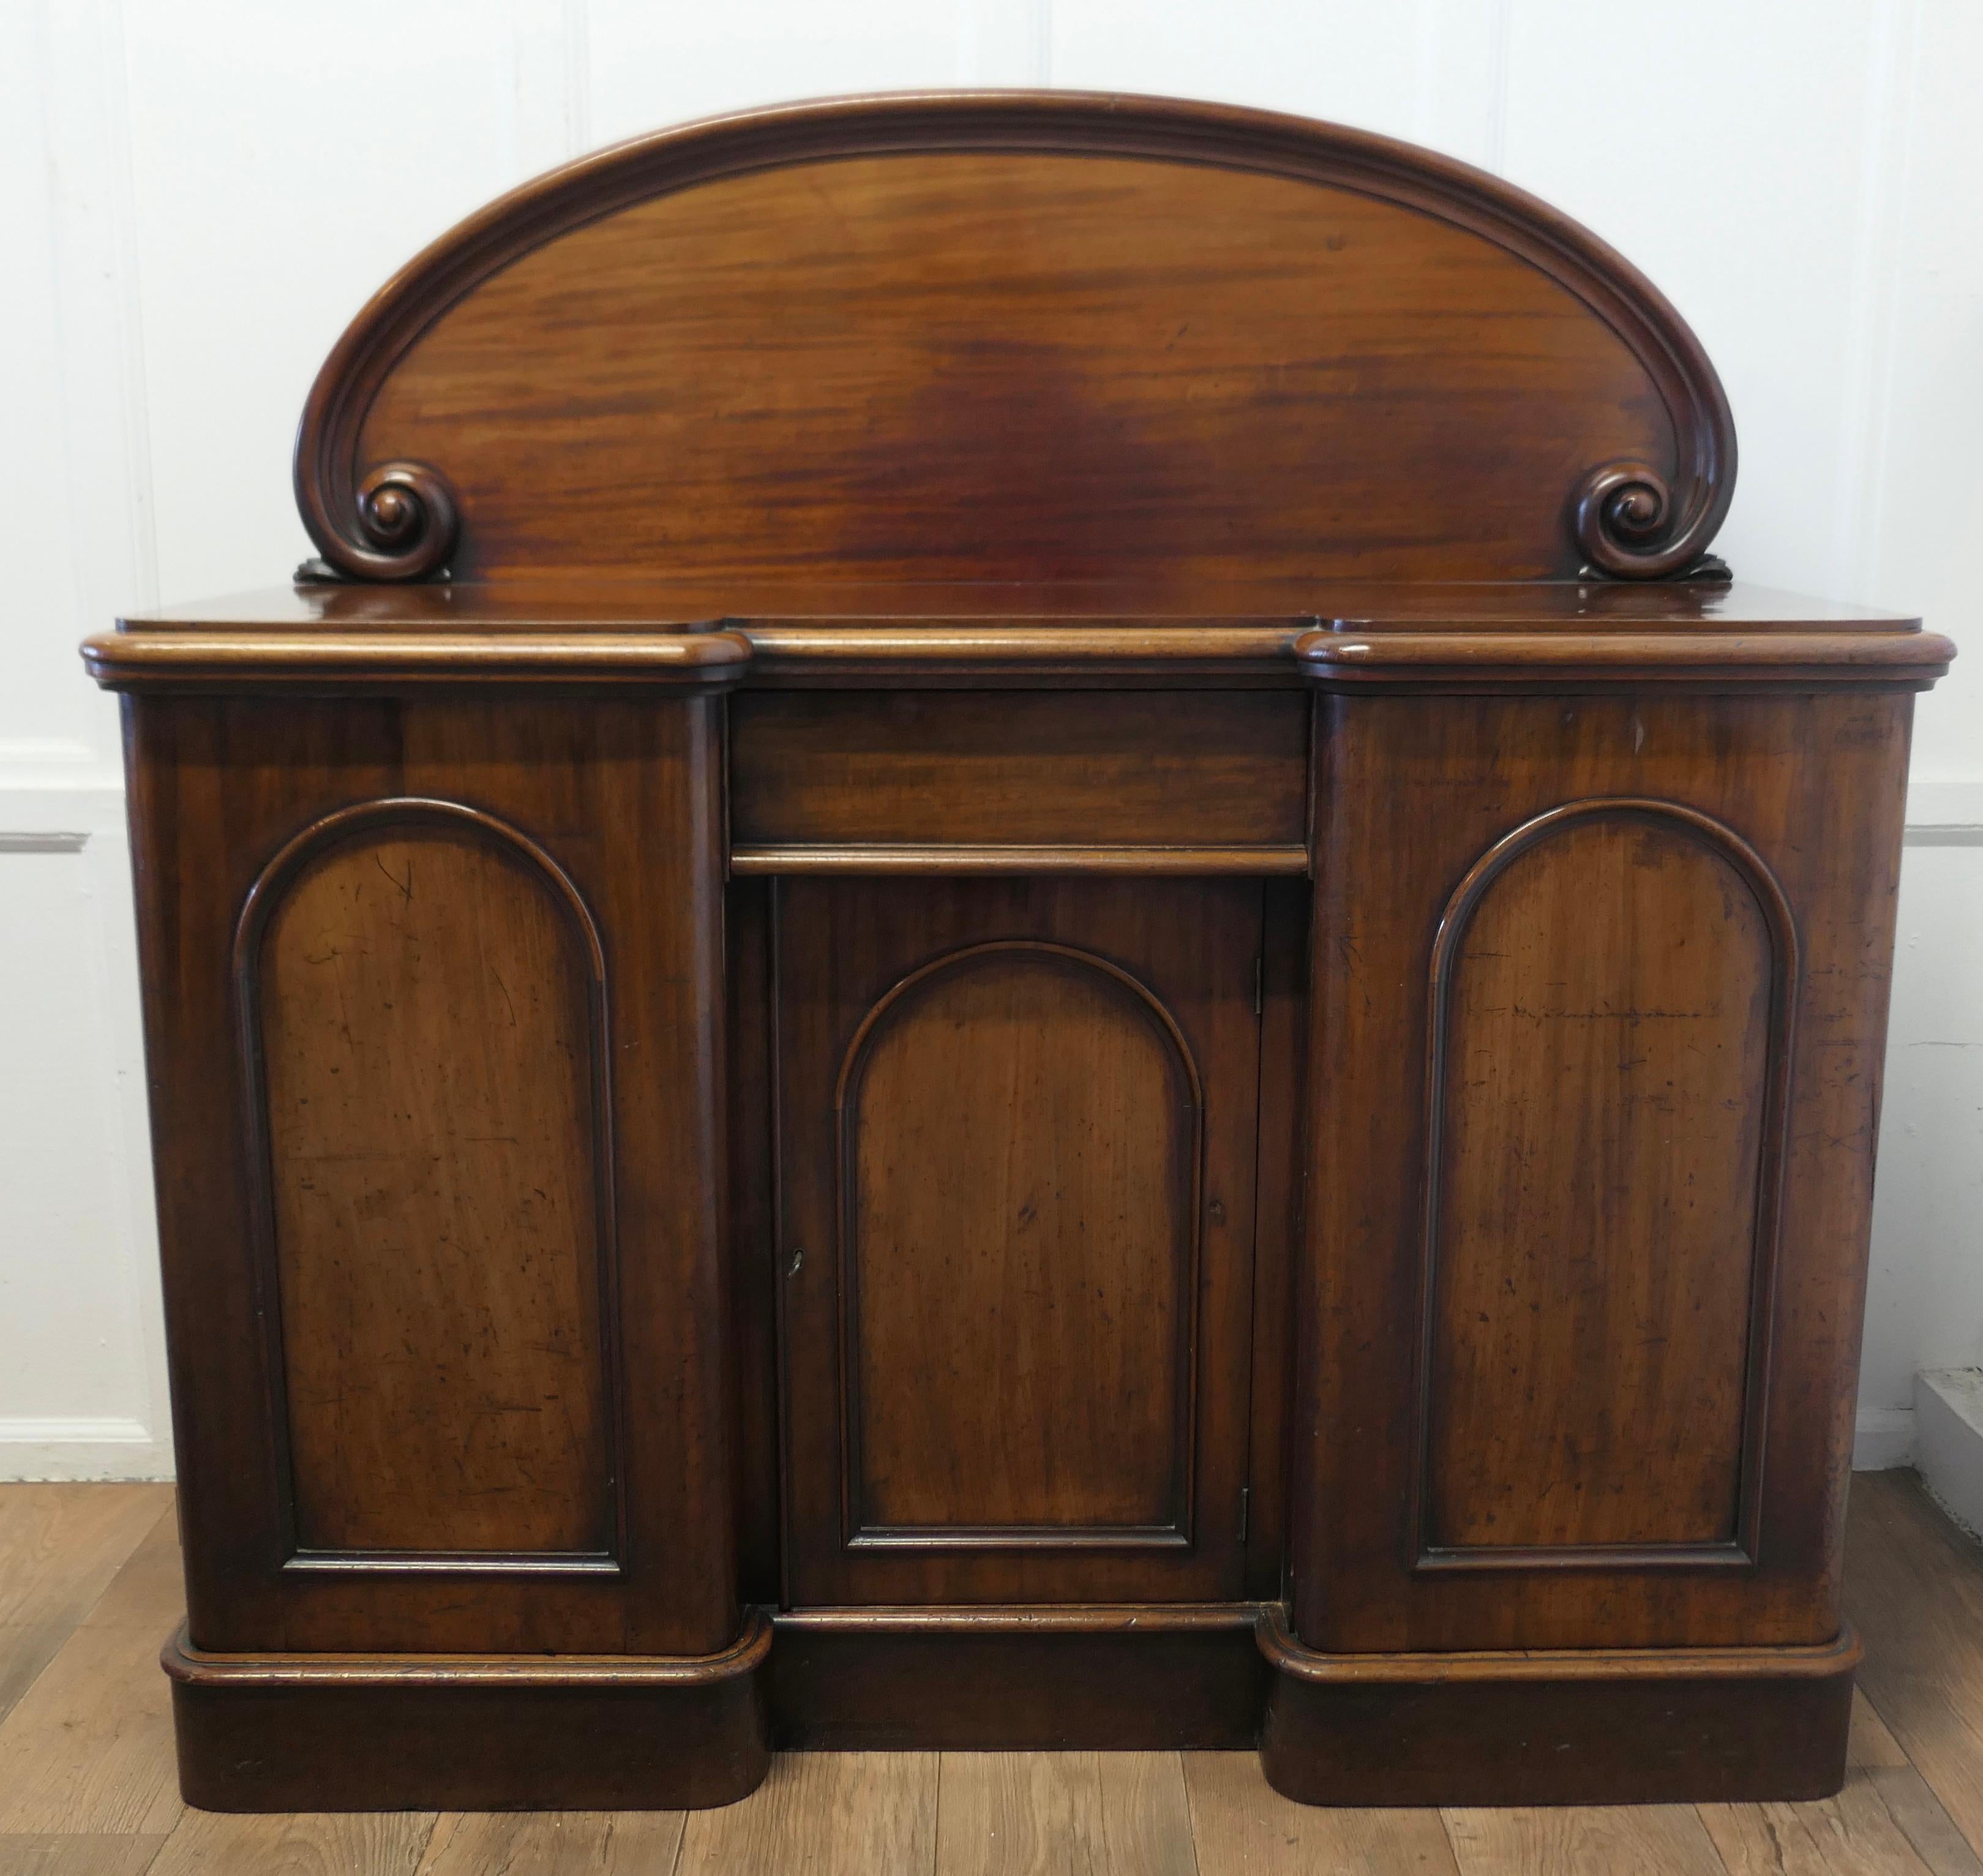 A Medium Size Victorian Sideboard or Chiffonier

The Sideboard has an arched back with carved scroll decoration and it is set on a deep plinth
The Chiffonier has a slight Break front shape with a moulded edge to the counter top, there are 3 arch